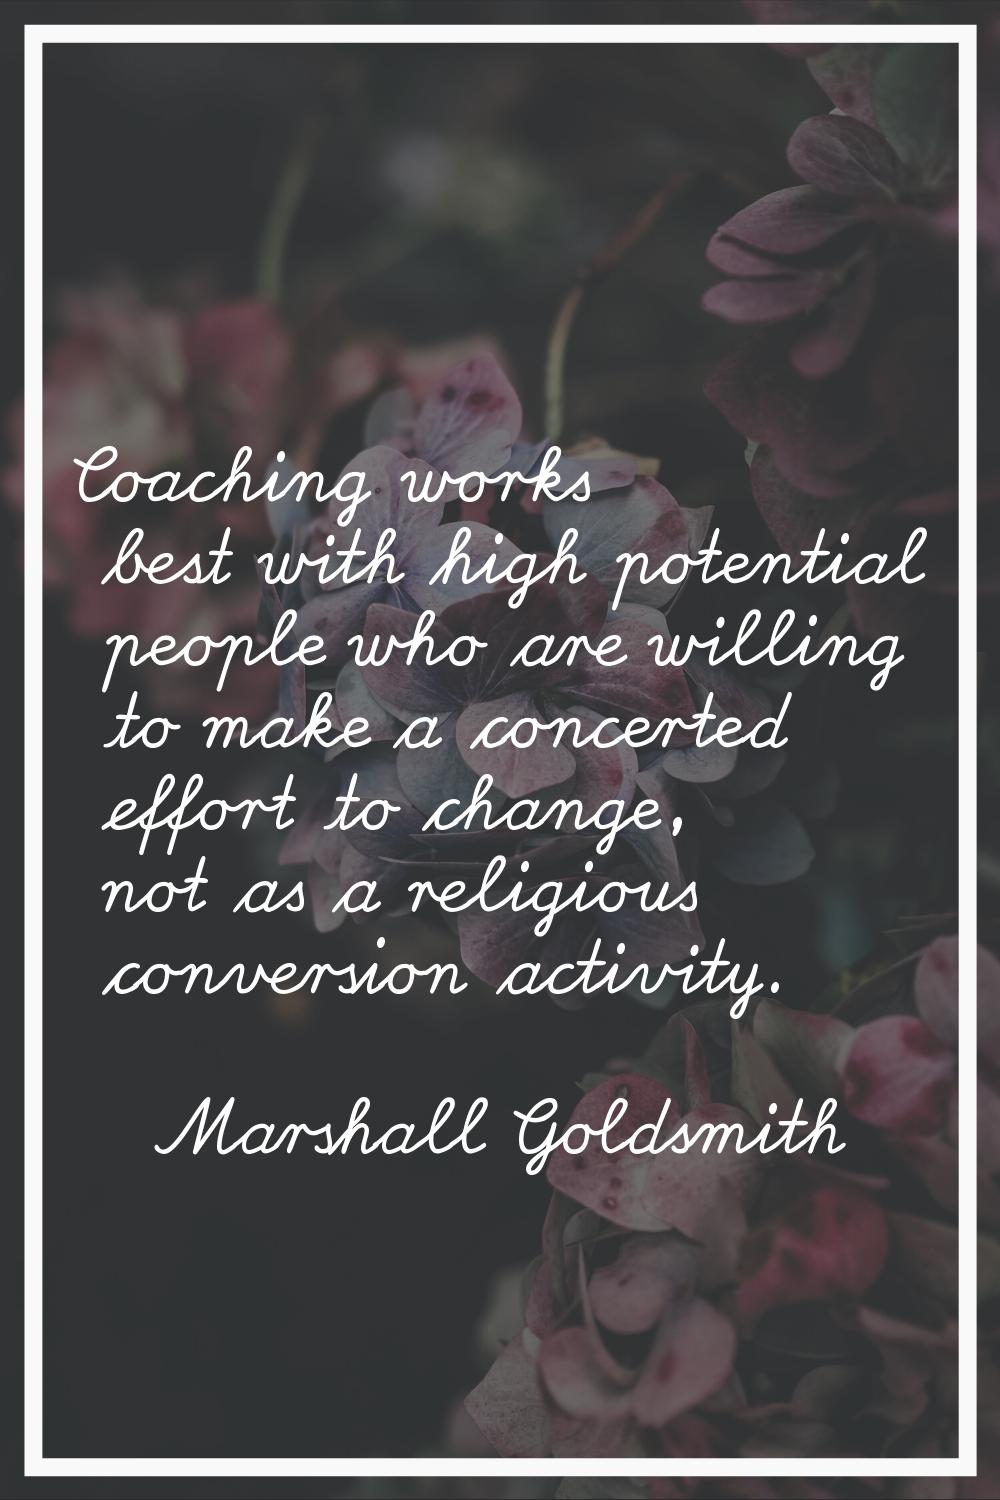 Coaching works best with high potential people who are willing to make a concerted effort to change